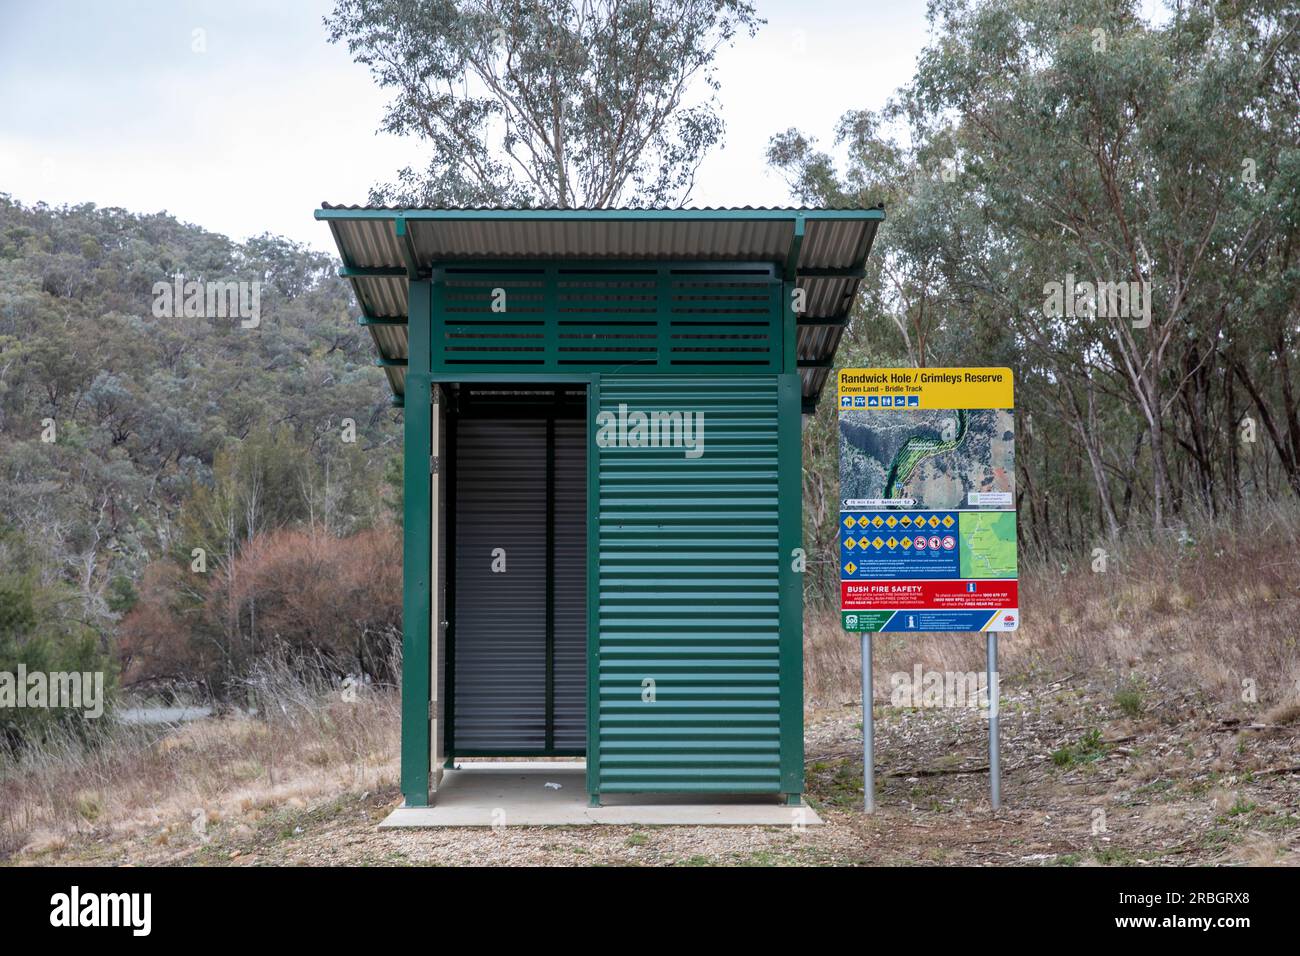 Hill End bridle path track and drop toilet facility for campers at Randwick hole reserve, New South Wales,Australia Stock Photo